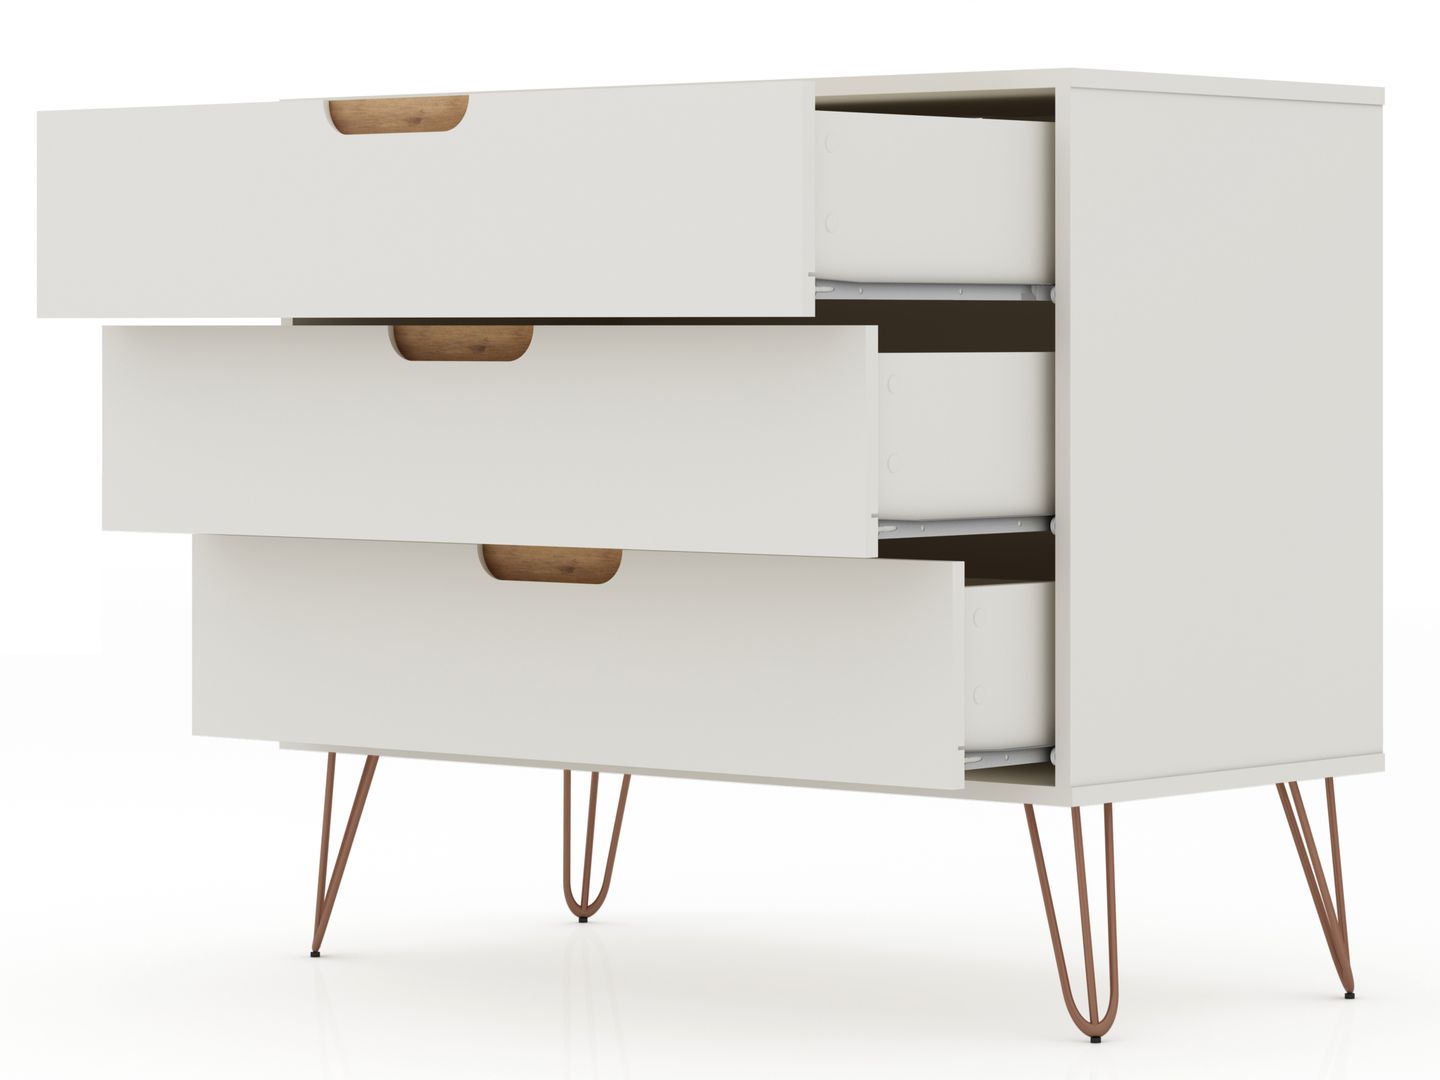 Manhattan Comfort Rockefeller Mic Century- Modern Dresser and Nightstand with Drawers- Set of 2 in Off White and Nature